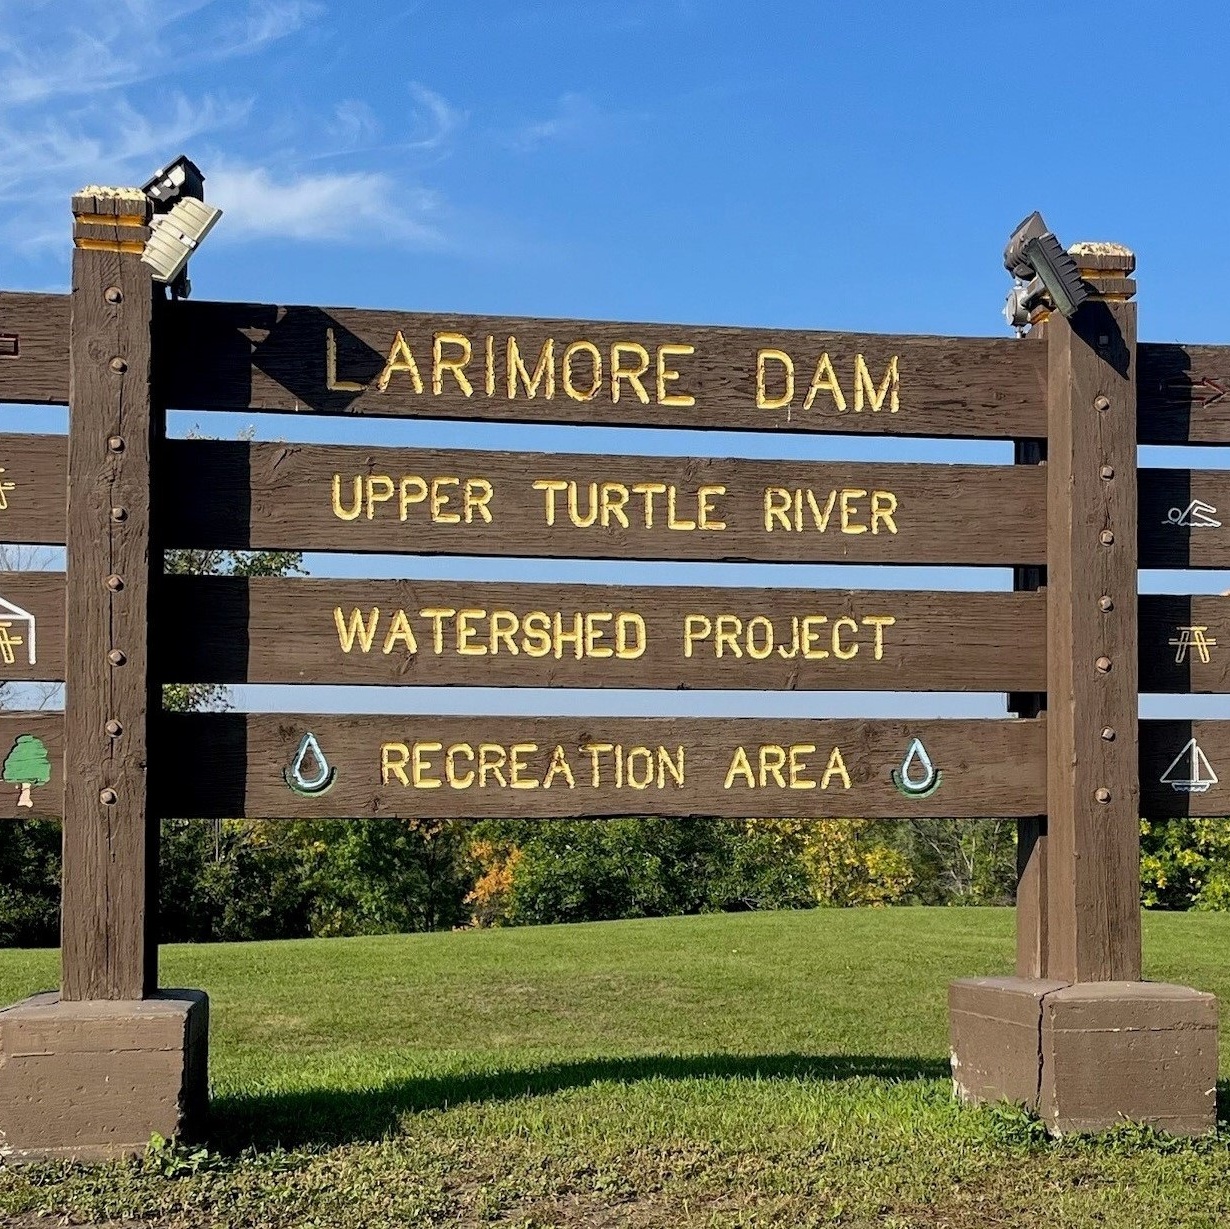 A wooden sign that reads "Larimore Dam Upper Turtle River Watershed Project Recreation Area"